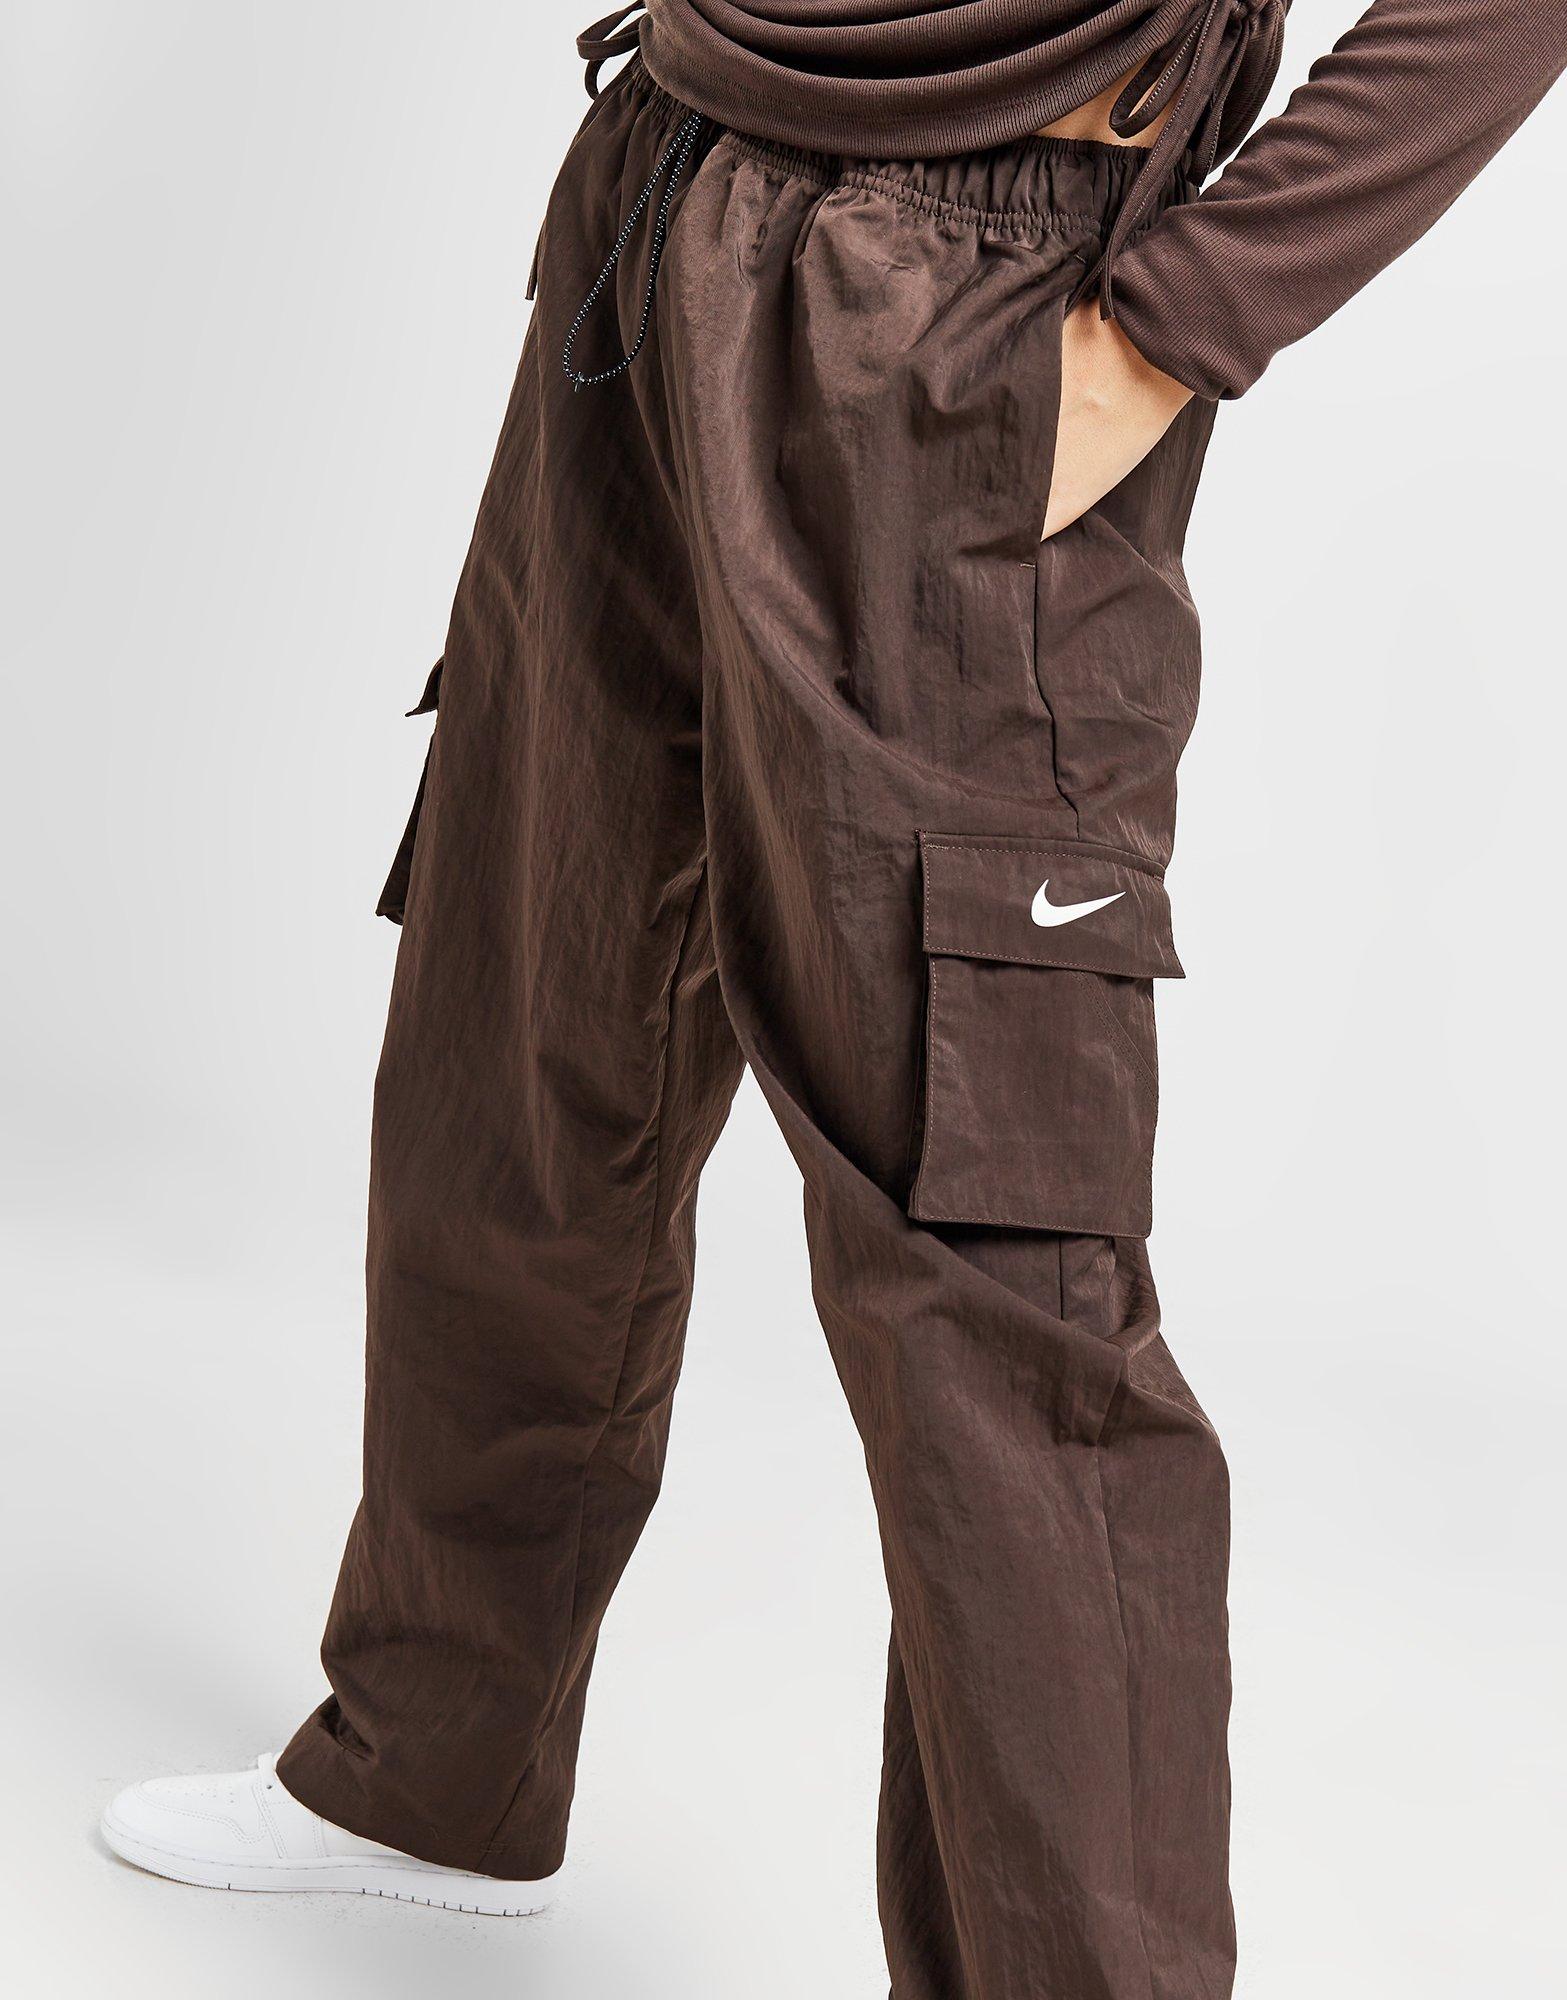 Breathable Trousers & Tights. Nike AU